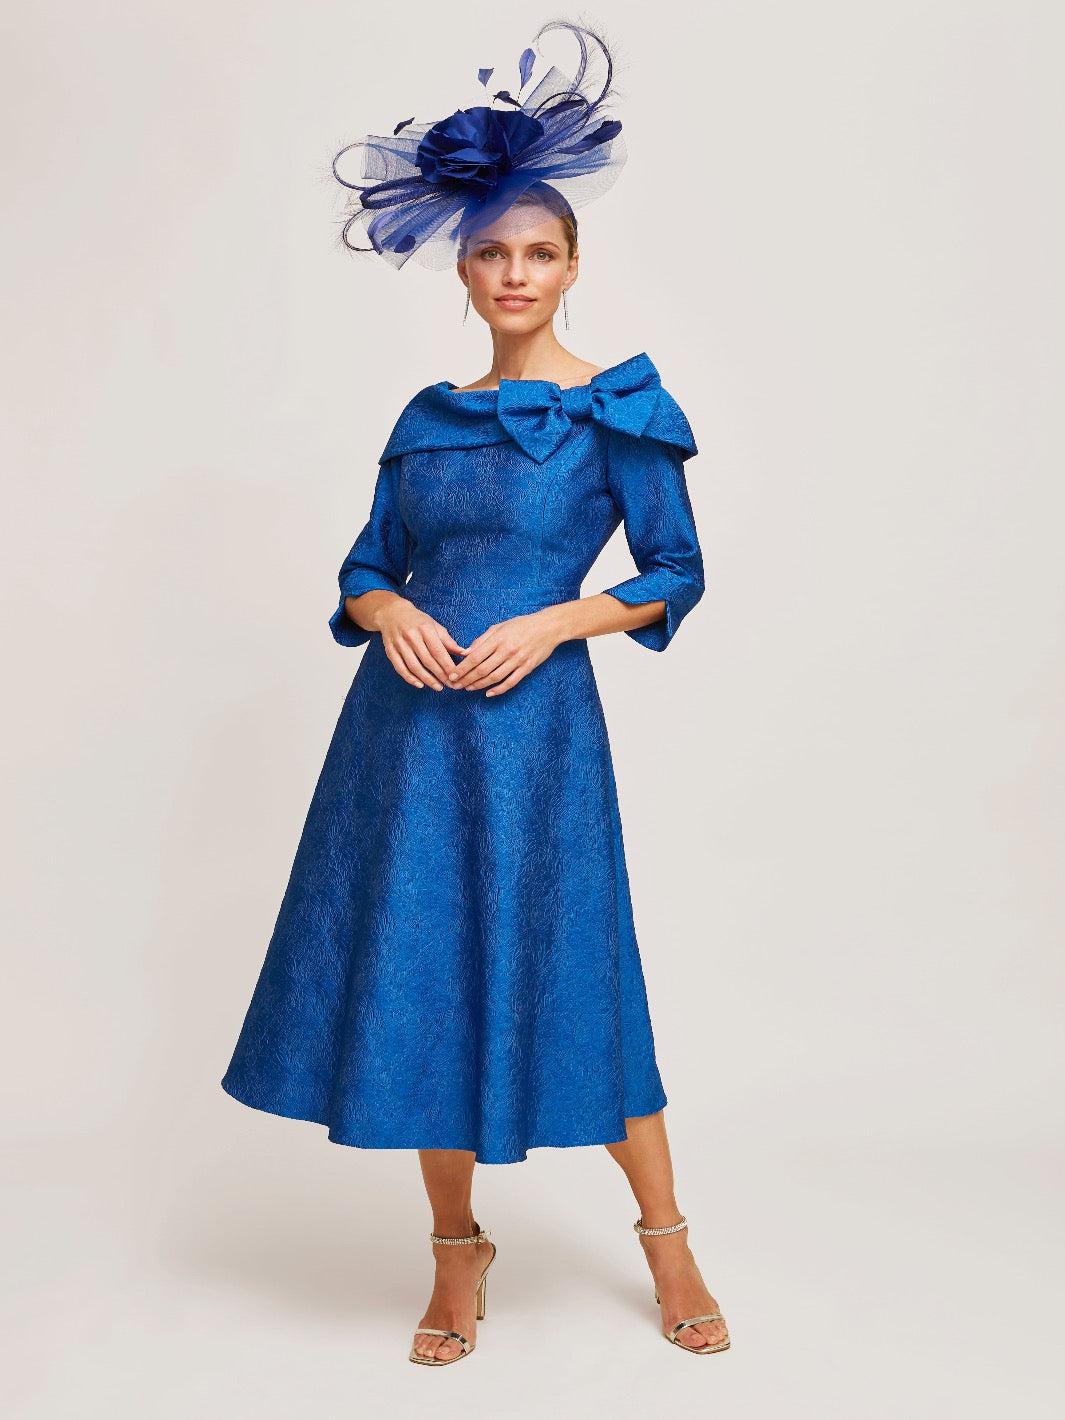 Luis Civit Dress FD807 In Blue-Mother of the bride- mother of the groom -Nicola Ross